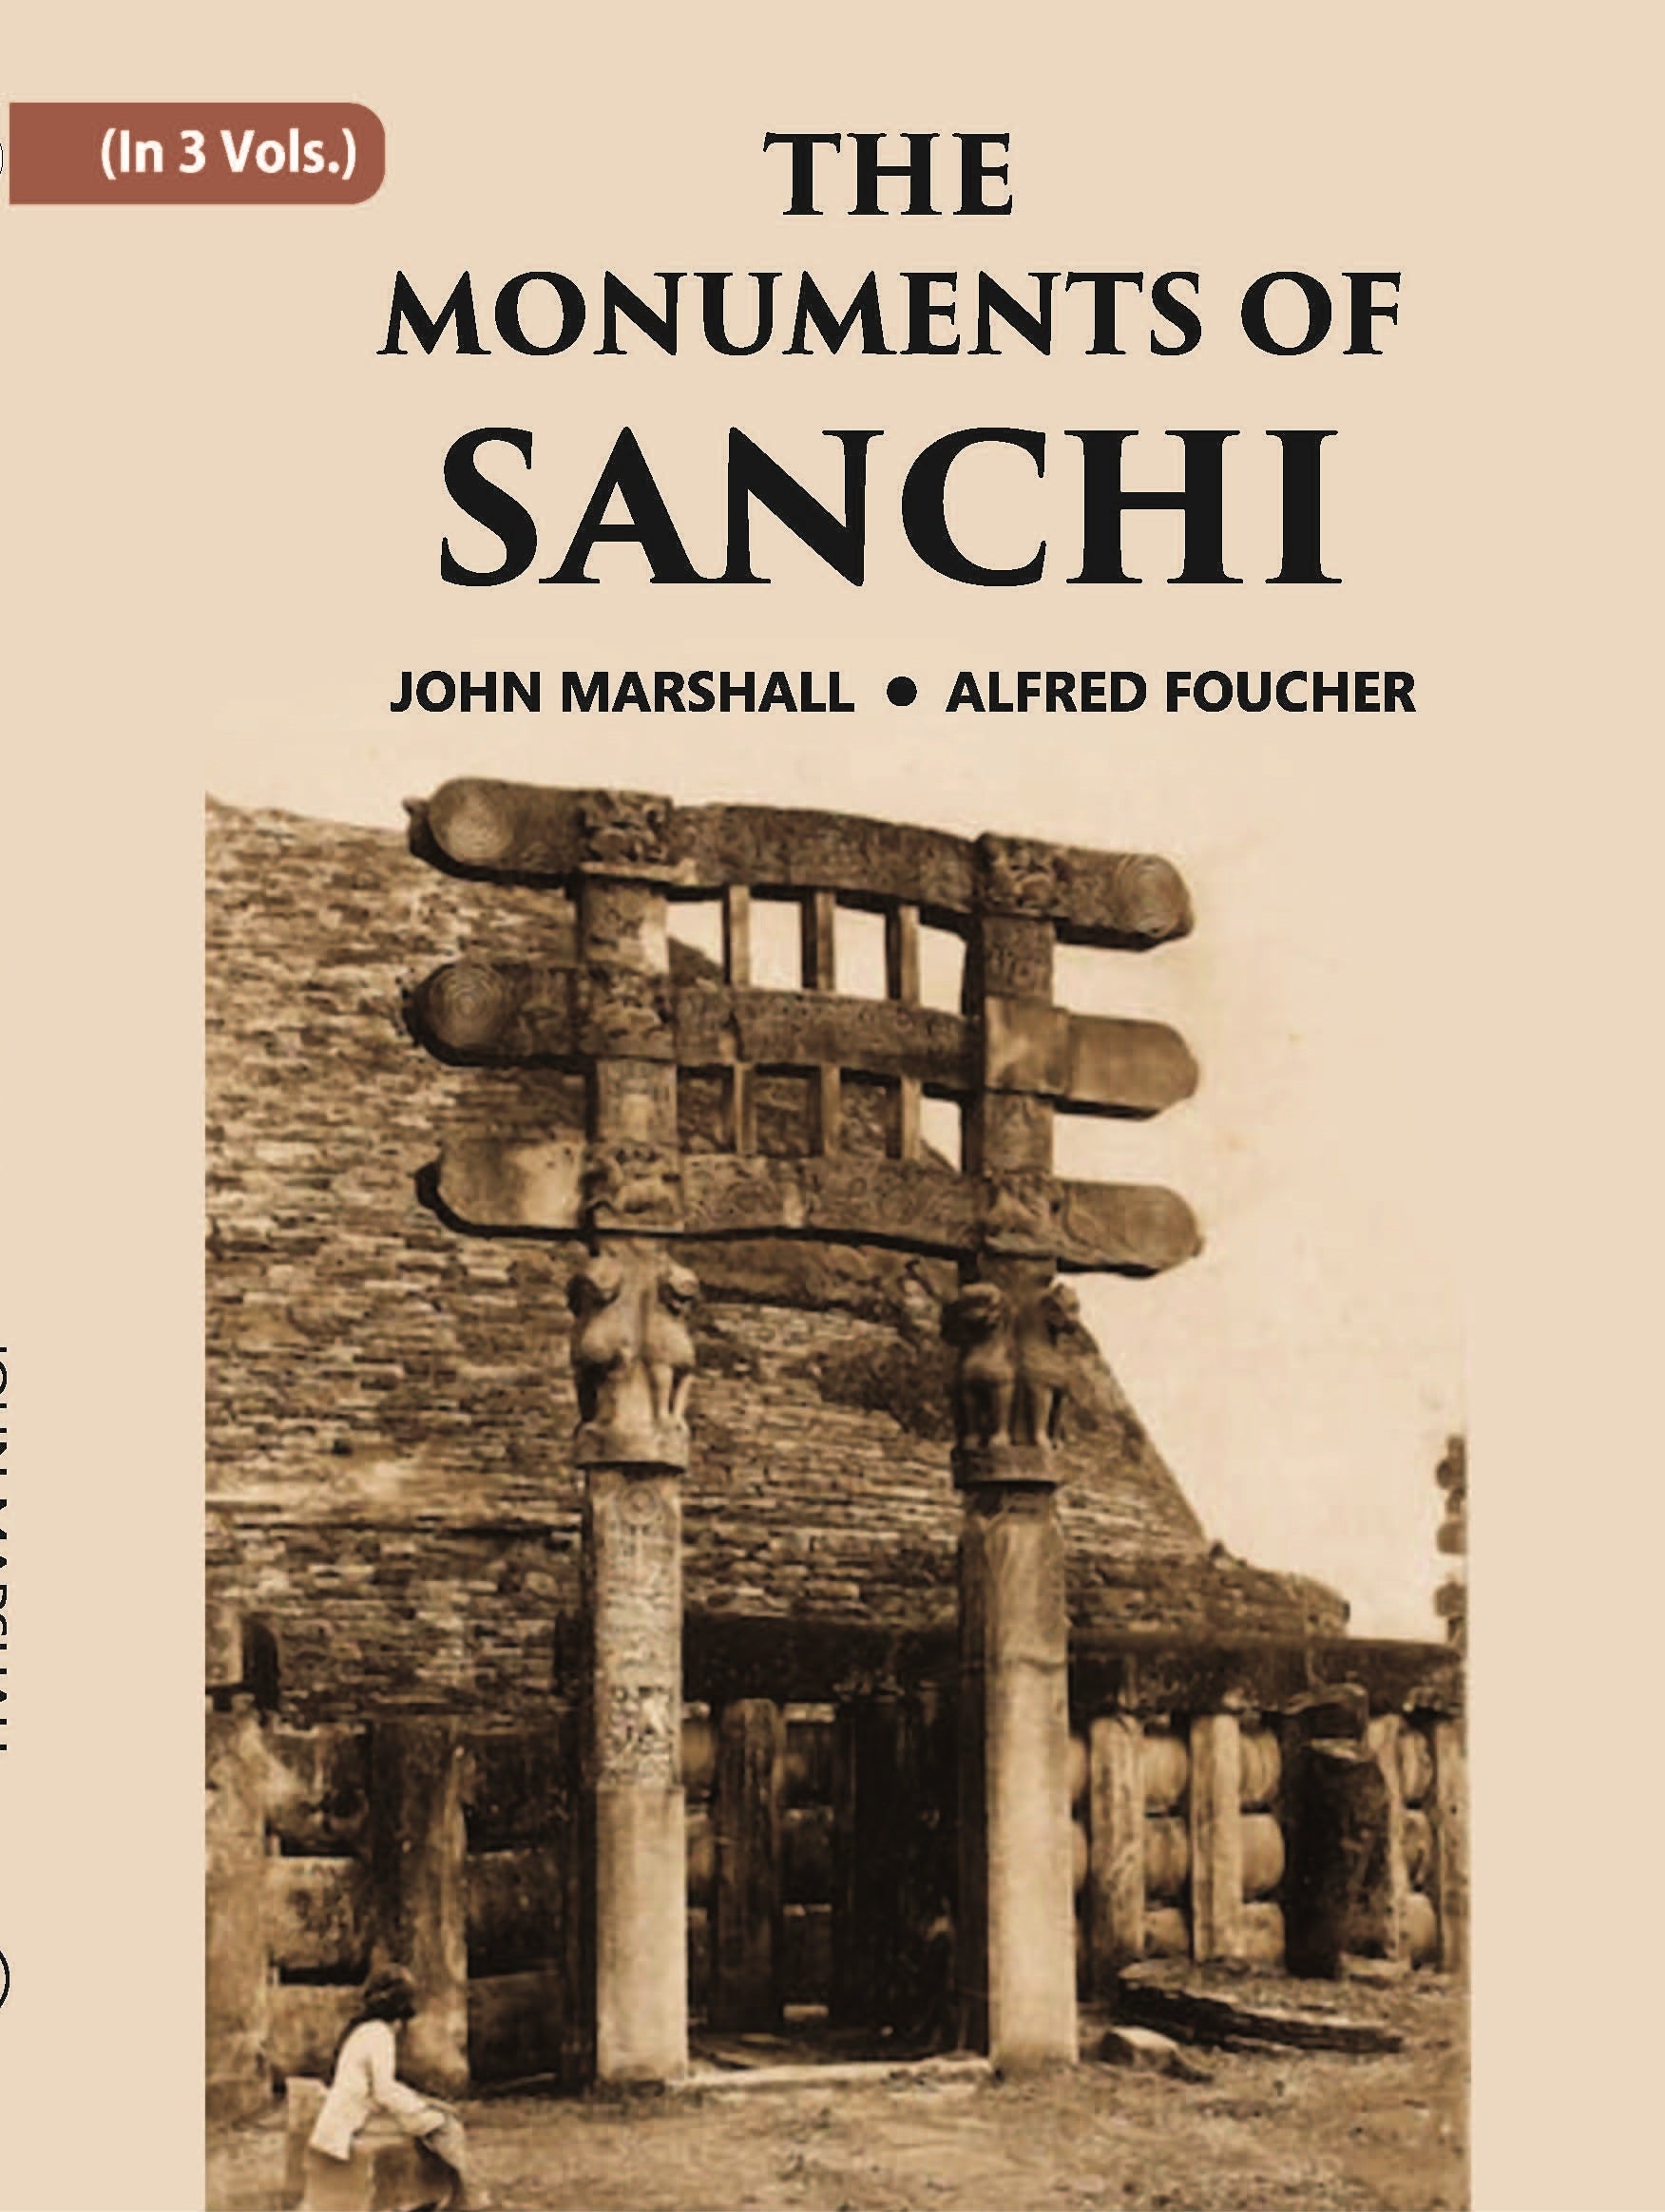 THE MONUMENTS OF SANCHI Volume Vol. 3rd